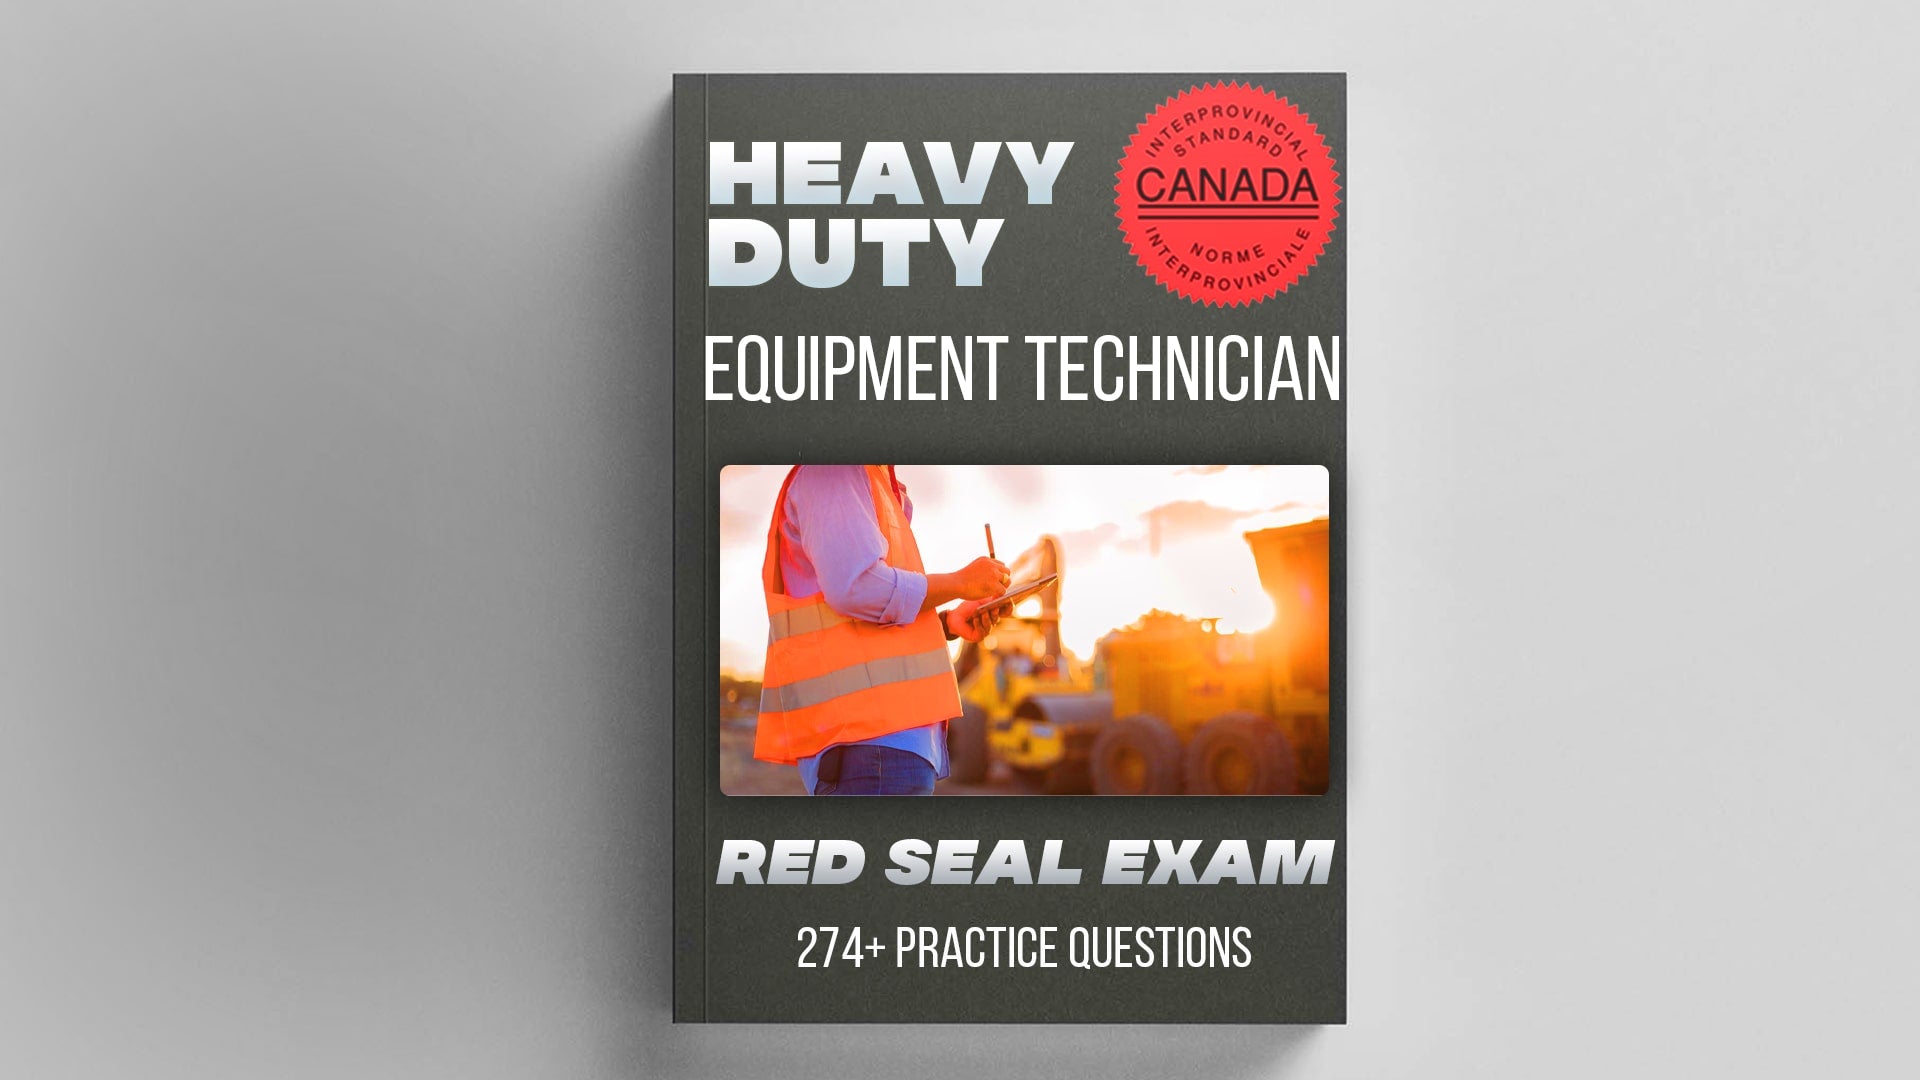 A Heavy Duty Equipment Technician inspects, diagnoses, troubleshoots, repairs, and verifies the repair of heavy duty equipment. They work on different types of heavy duty equipment such as draft shaft drive axle assemblies, final drive, structure components and accessories, tires, wheels, frames and undercarriages, and ground engaging equipment and attachments. Specifically, a Heavy Duty Equipment Technician